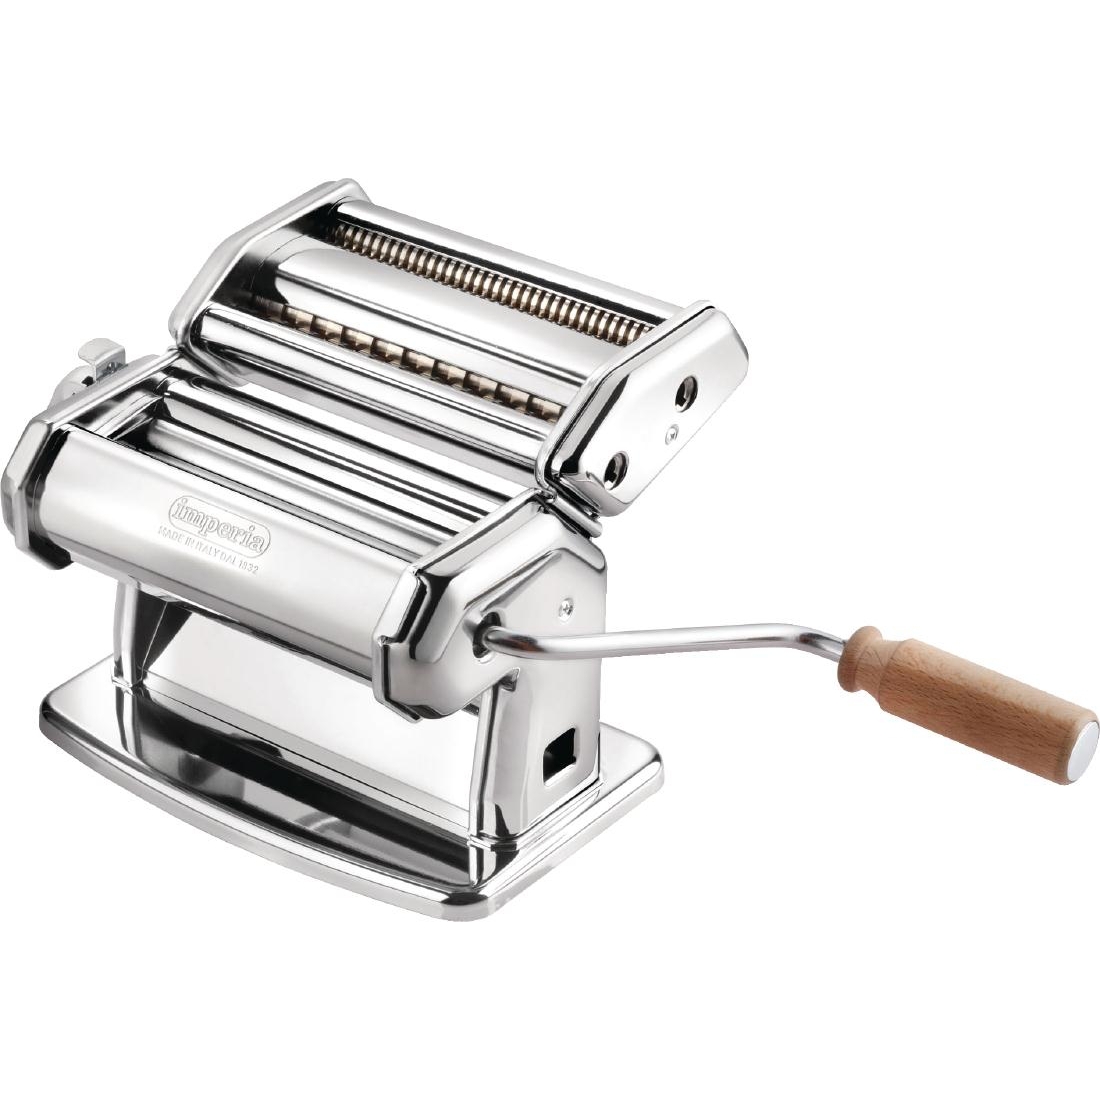 Vogue J578 Pasta Machine Supplied With 2 mm And 6.5 mm Cutters 